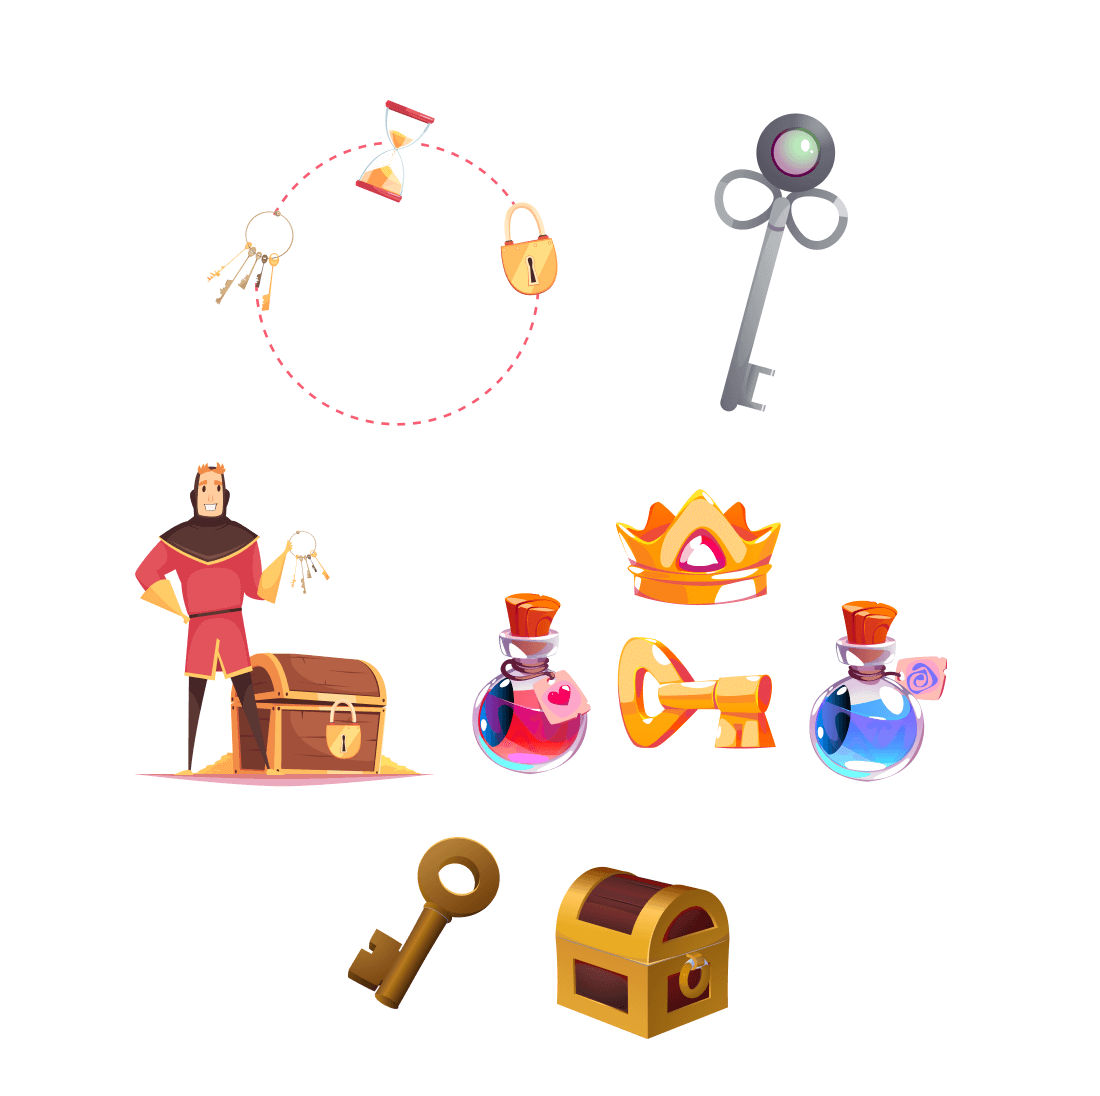 Drawing with a bunch of Disney keys, the character of the prince with the keys at the chest, vessels with a pink and blue vessel, a golden key.